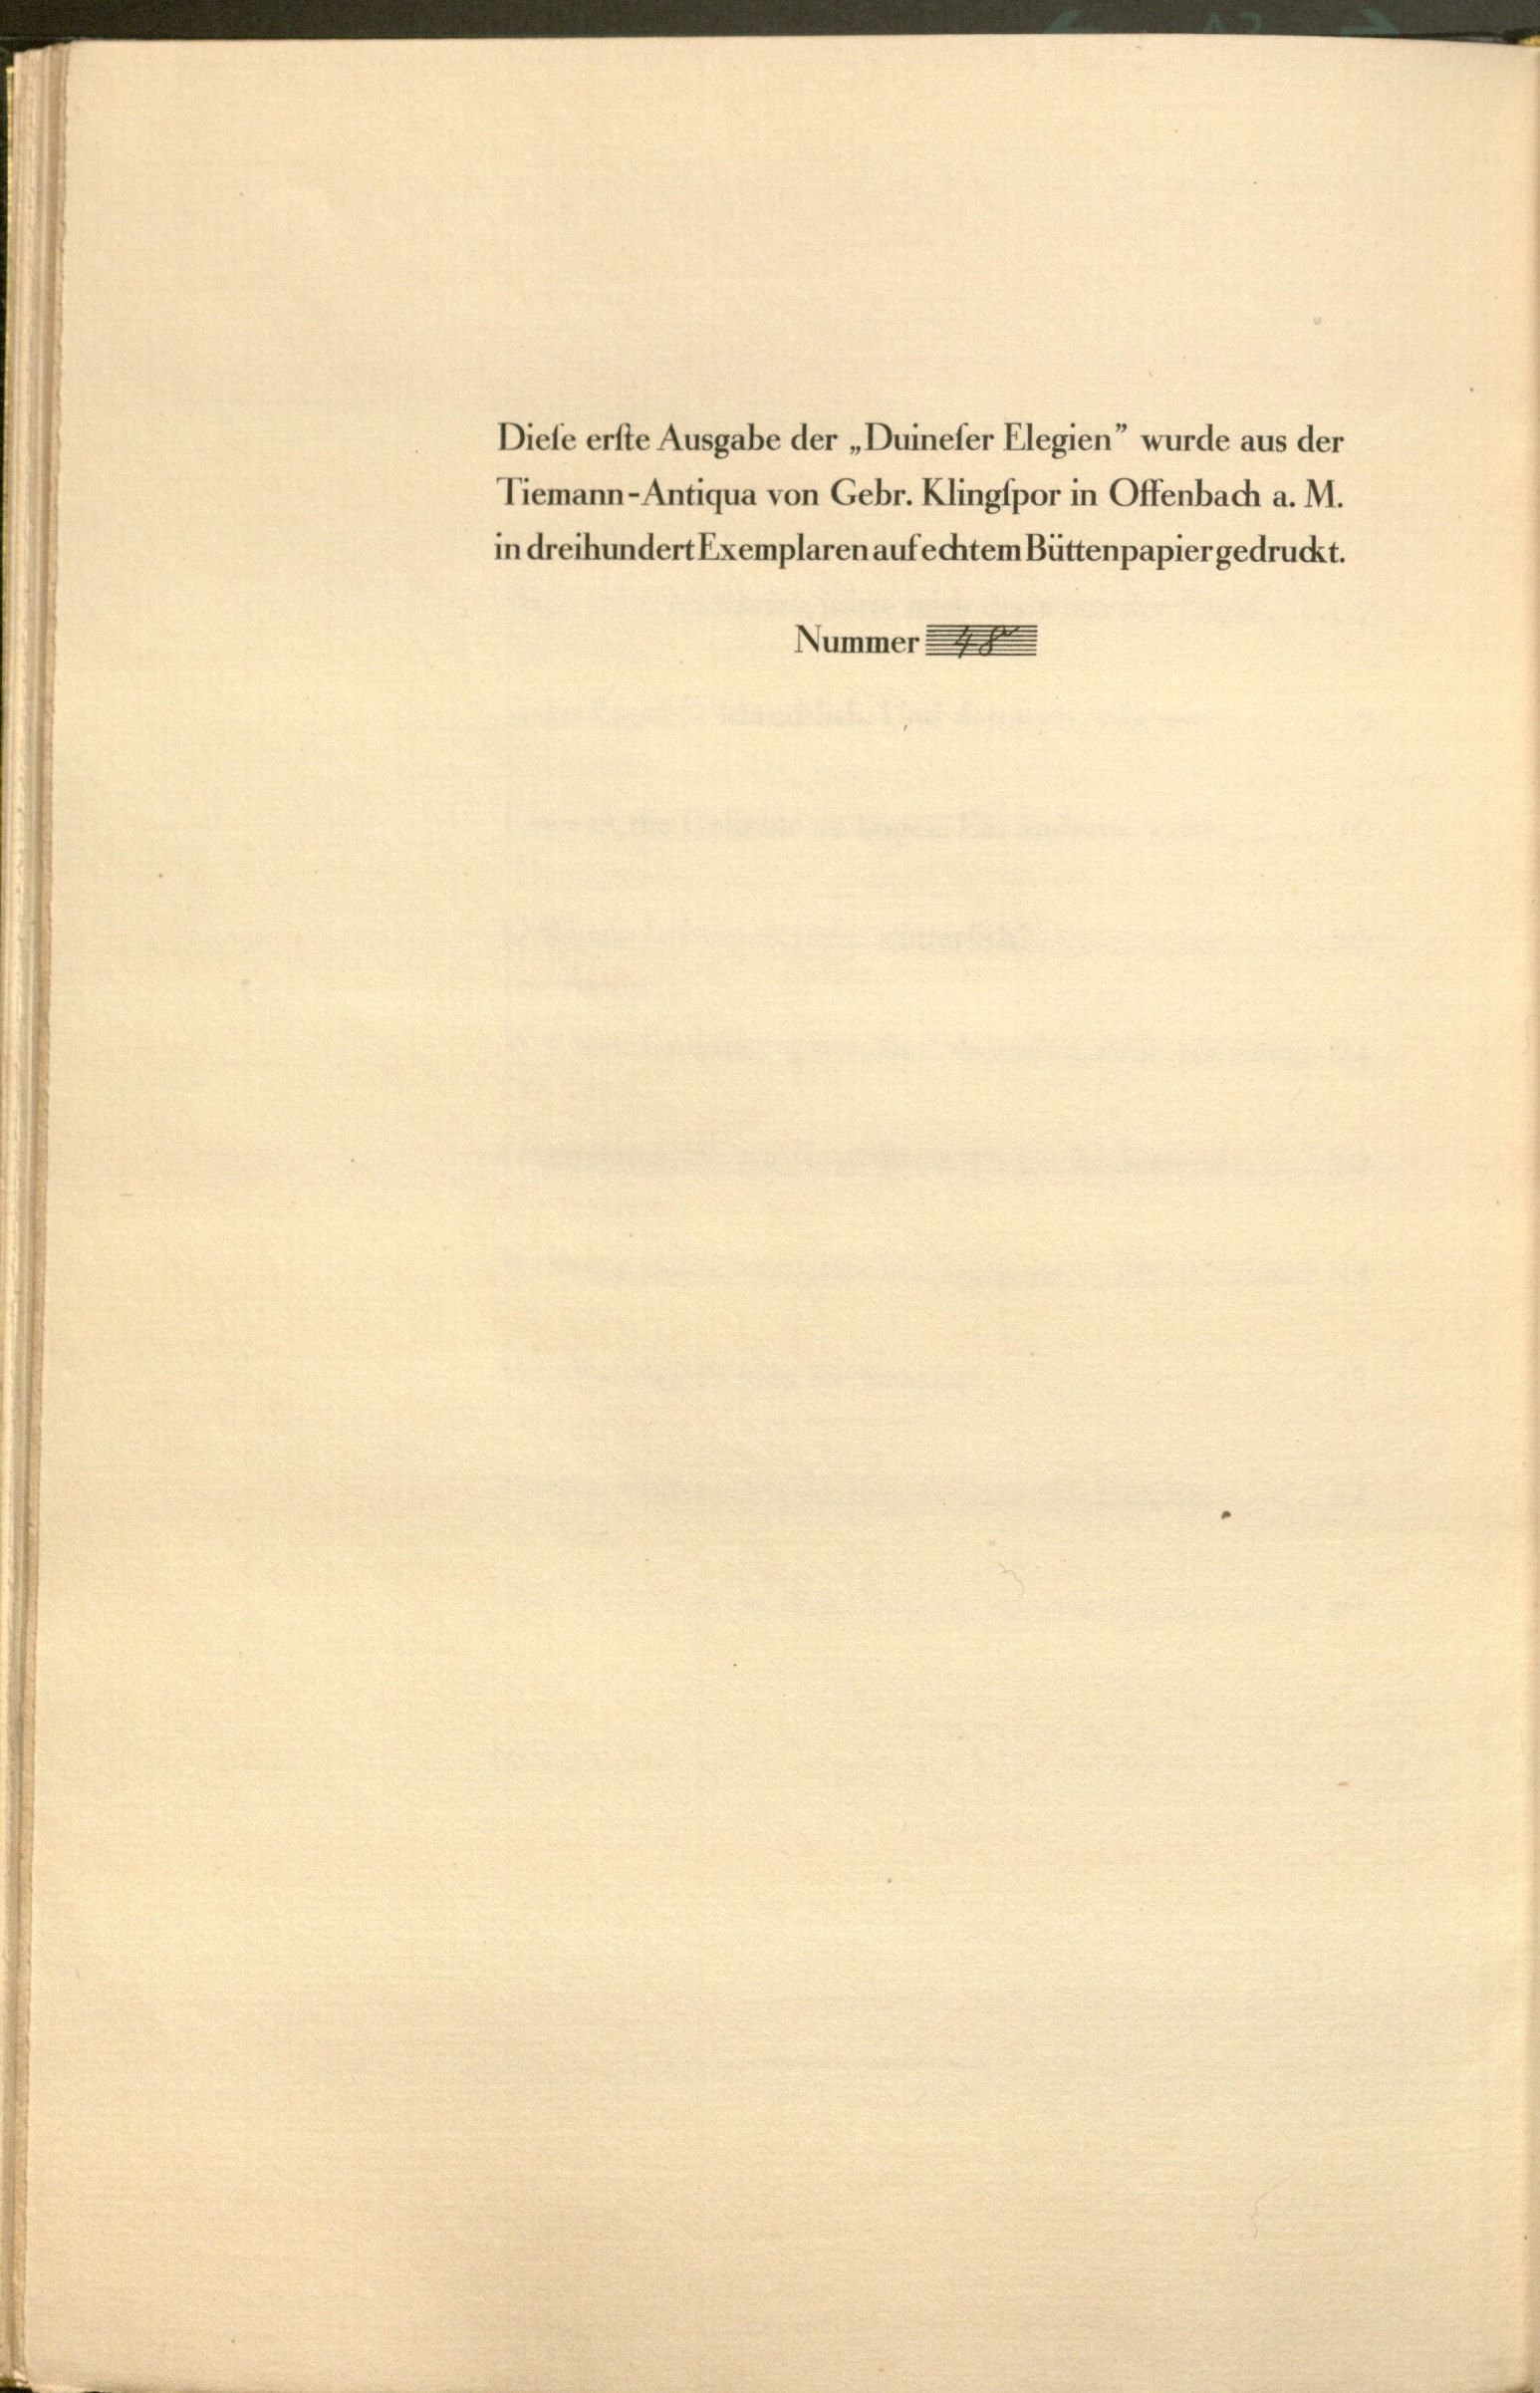 Rainer Maria Rilke’s Duineser Elegien, Leipzig: im Insel-Verlag, 1923: back page stating that this is the first edition, copy 48 of 300 printed on handmade paper. Special Collections, call number: Rilke Z50.